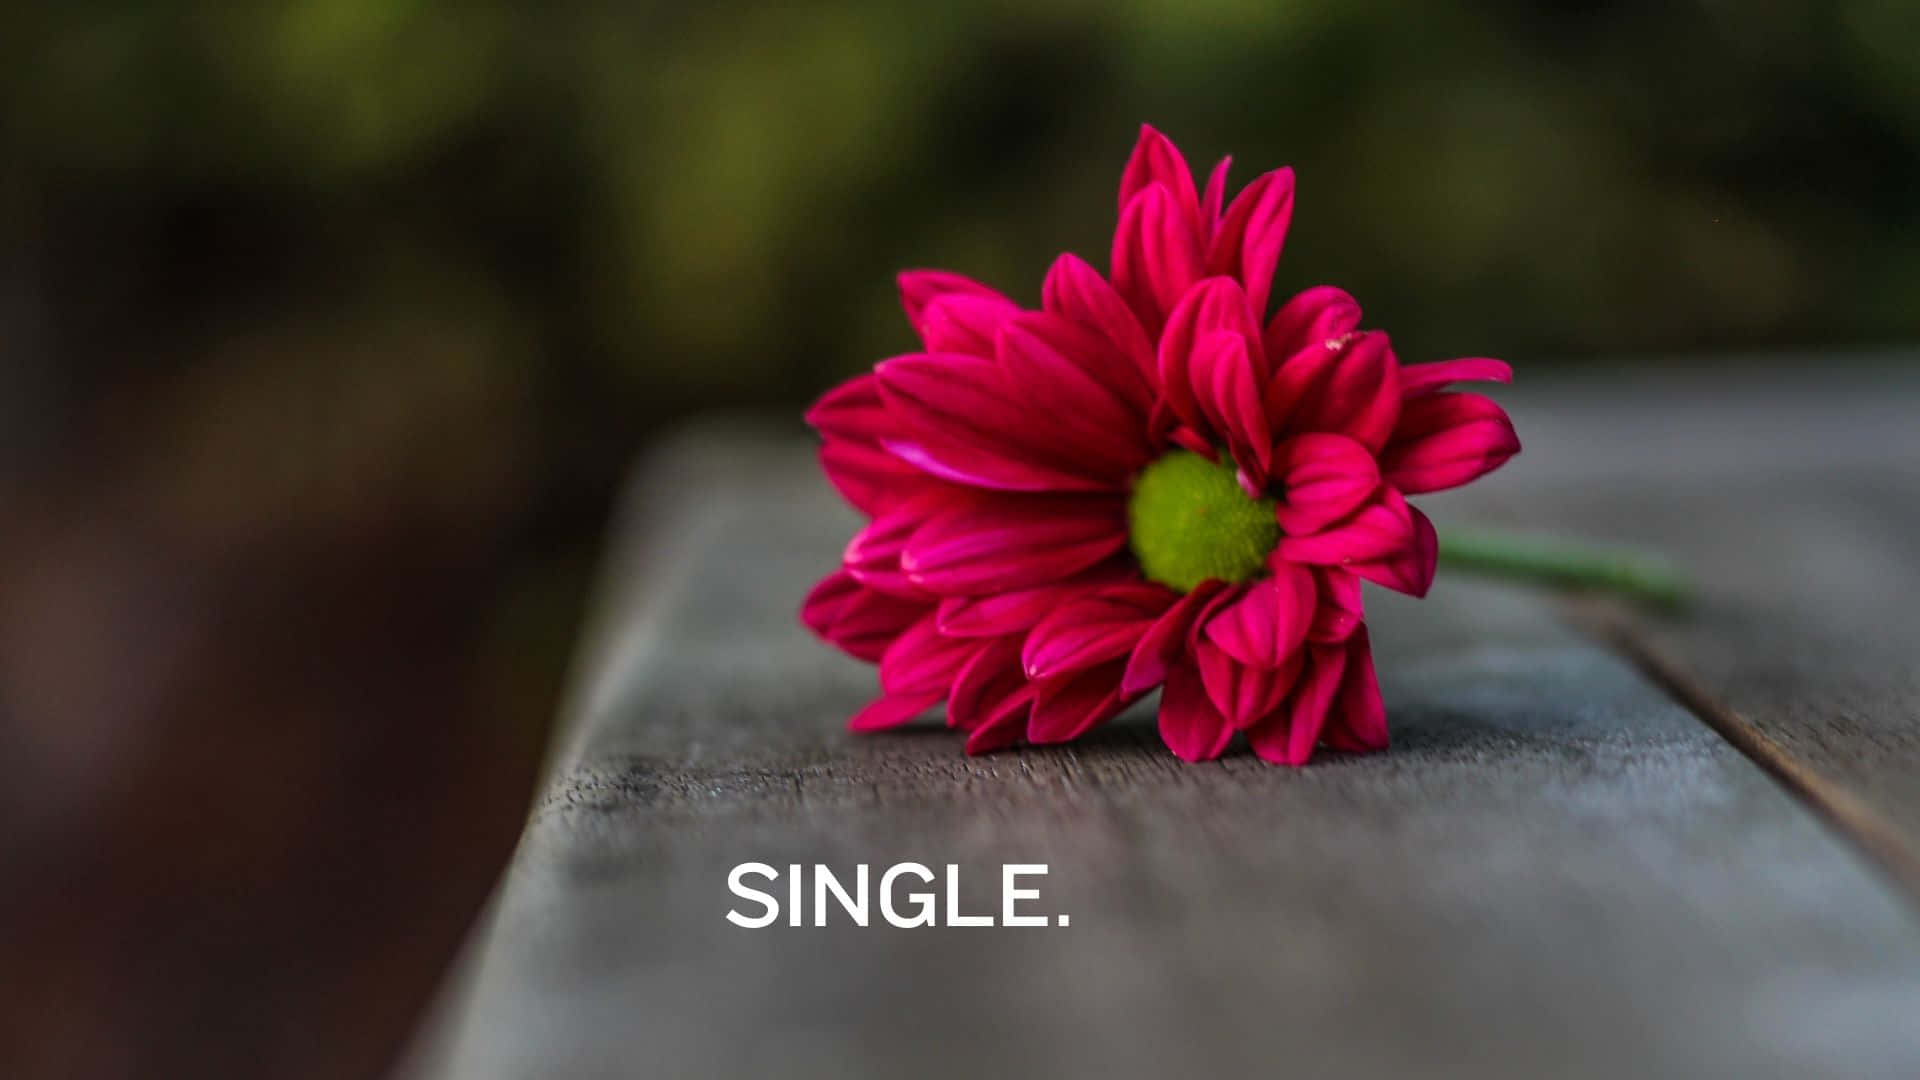 A Red Flower On A Wooden Table With The Words Single